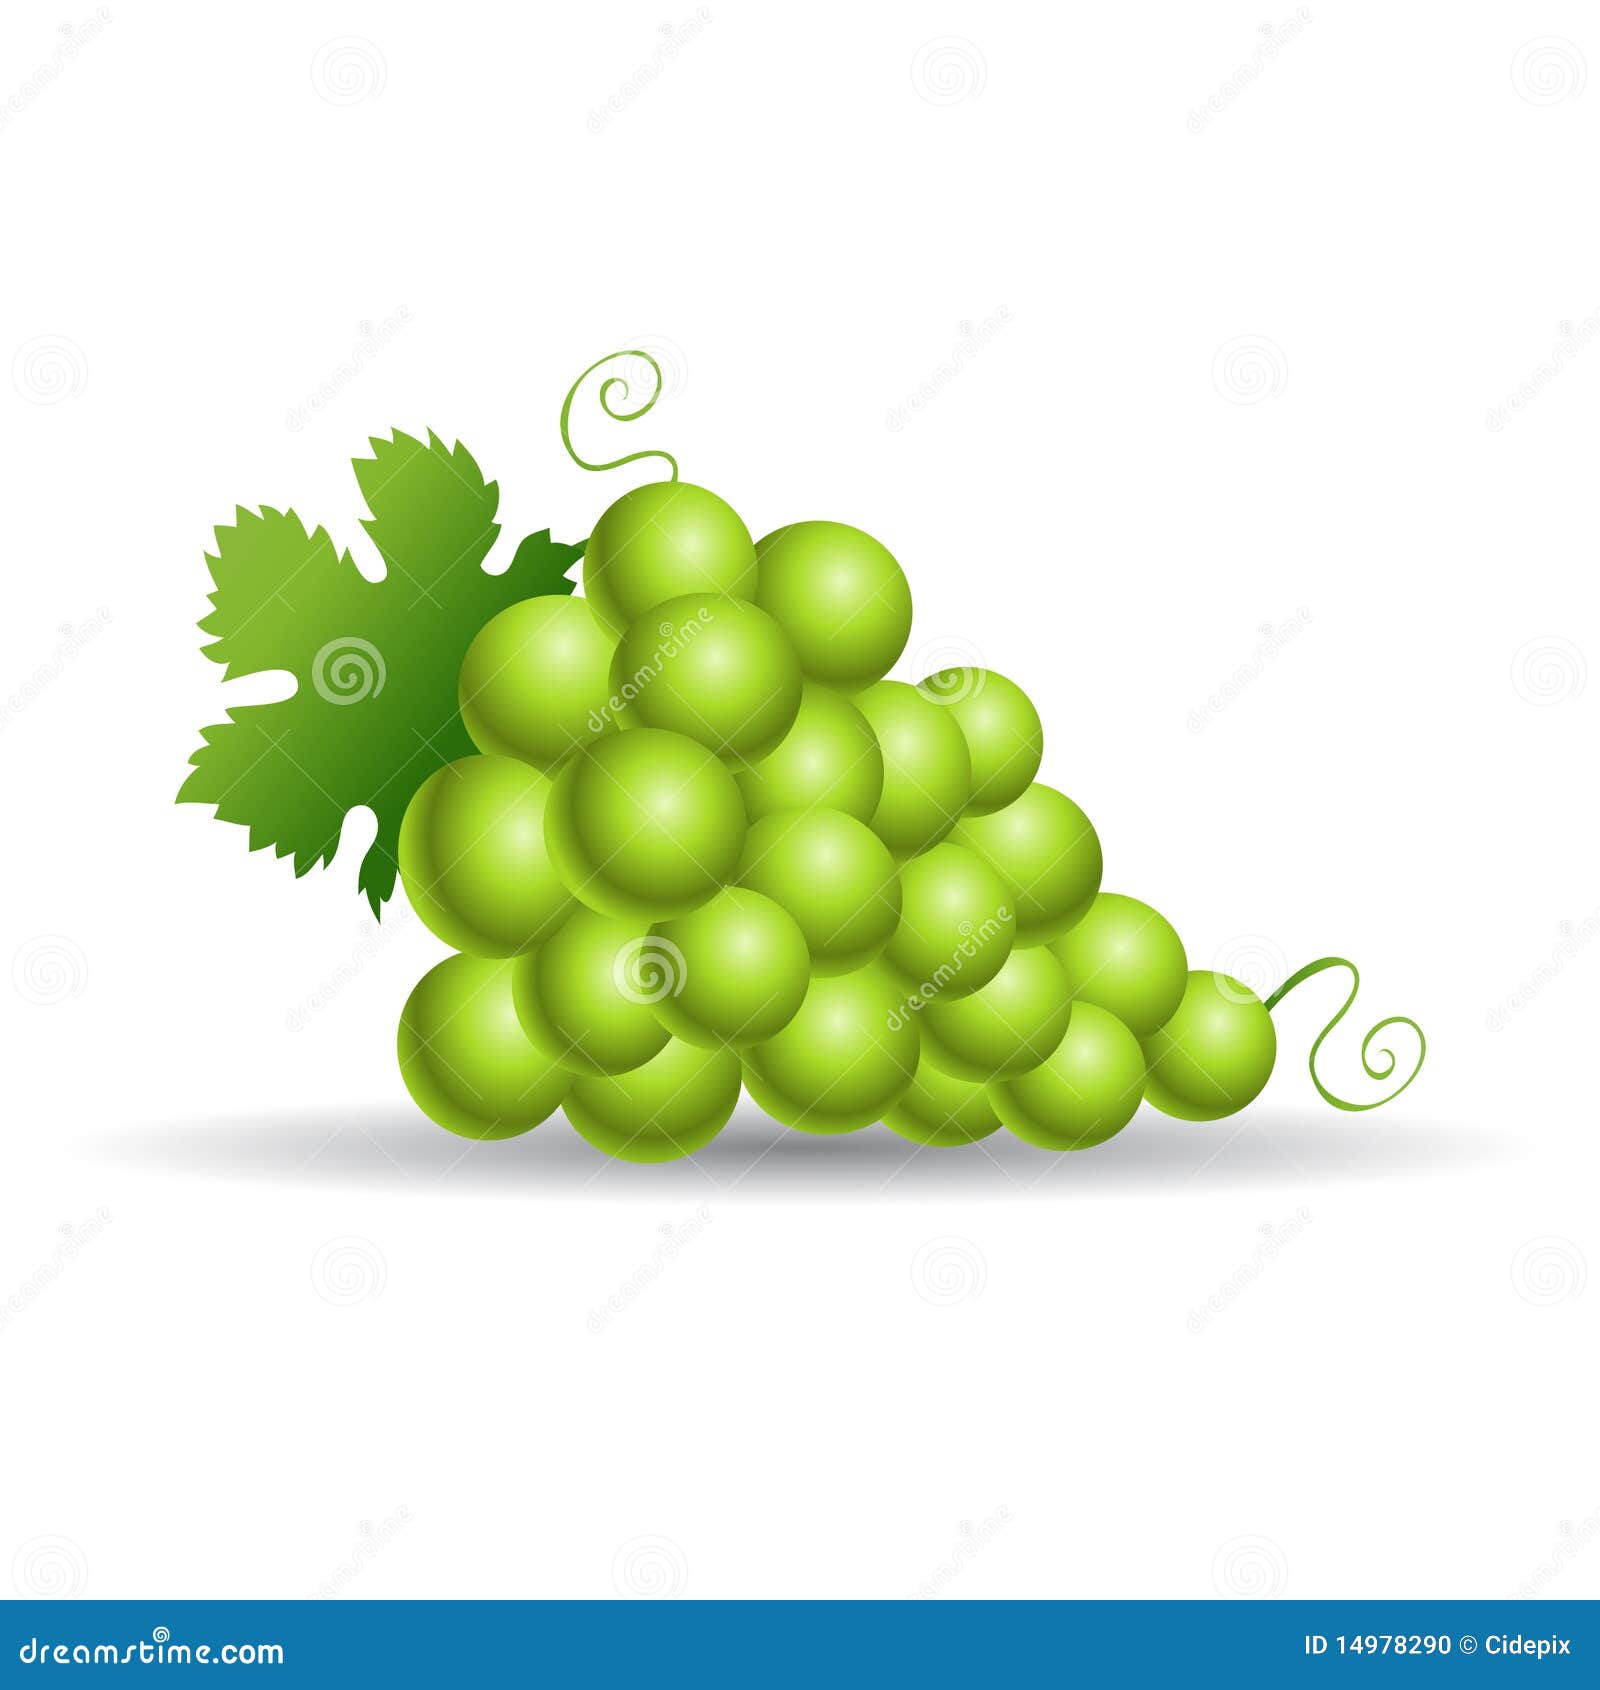 clipart green grapes - photo #32